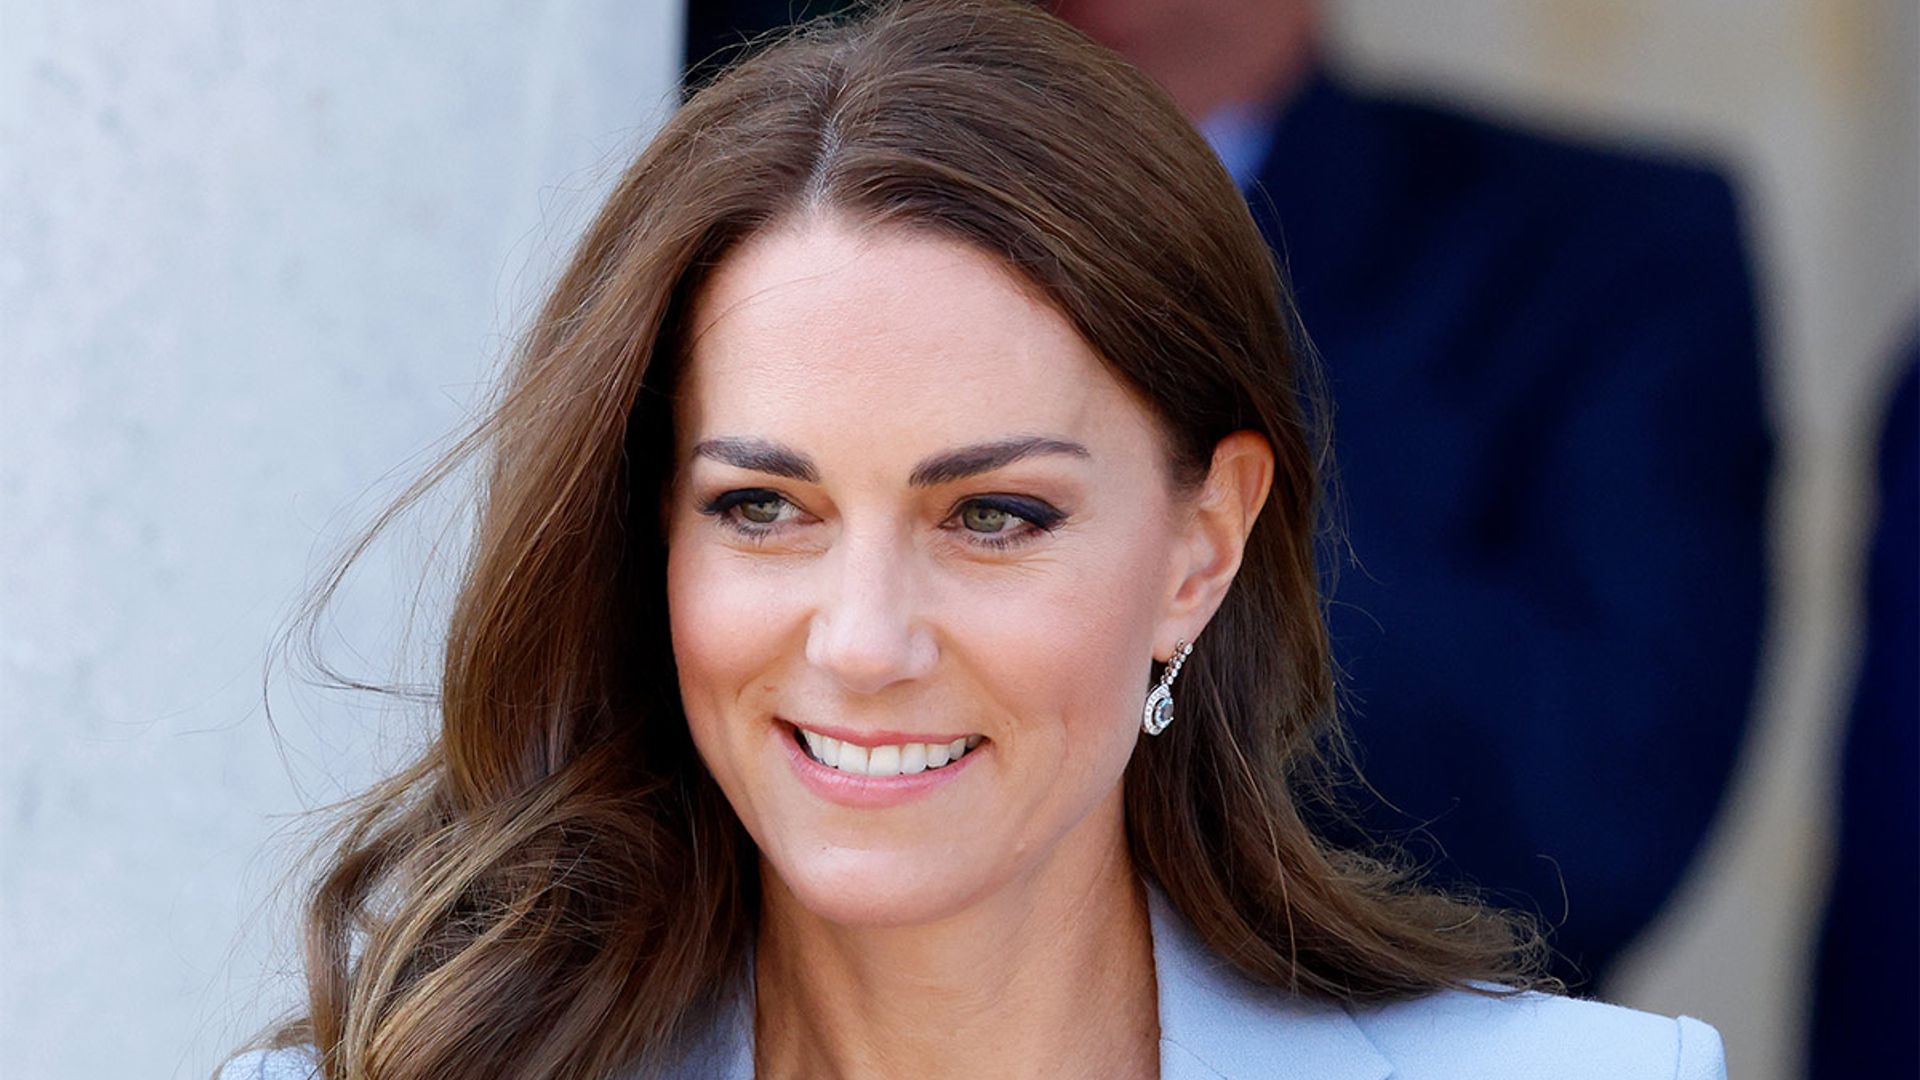 Kate Middleton's brand new photos have fans all saying the same thing ...